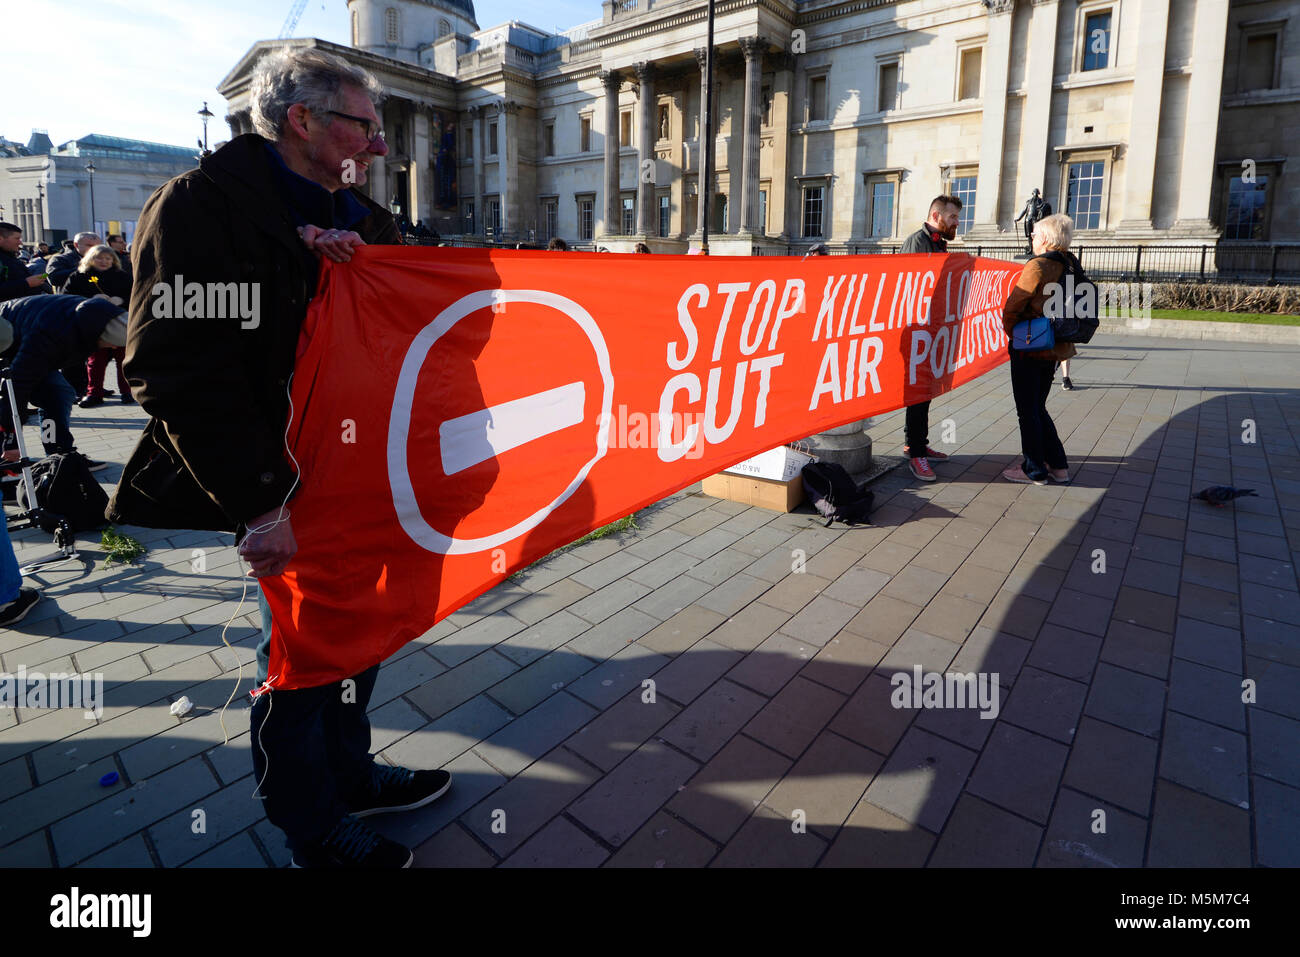 A demonstration in Trafalgar Square to promote clean air and protest against pollution, organised in part by ‘London Clean Air Coalition” Stock Photo